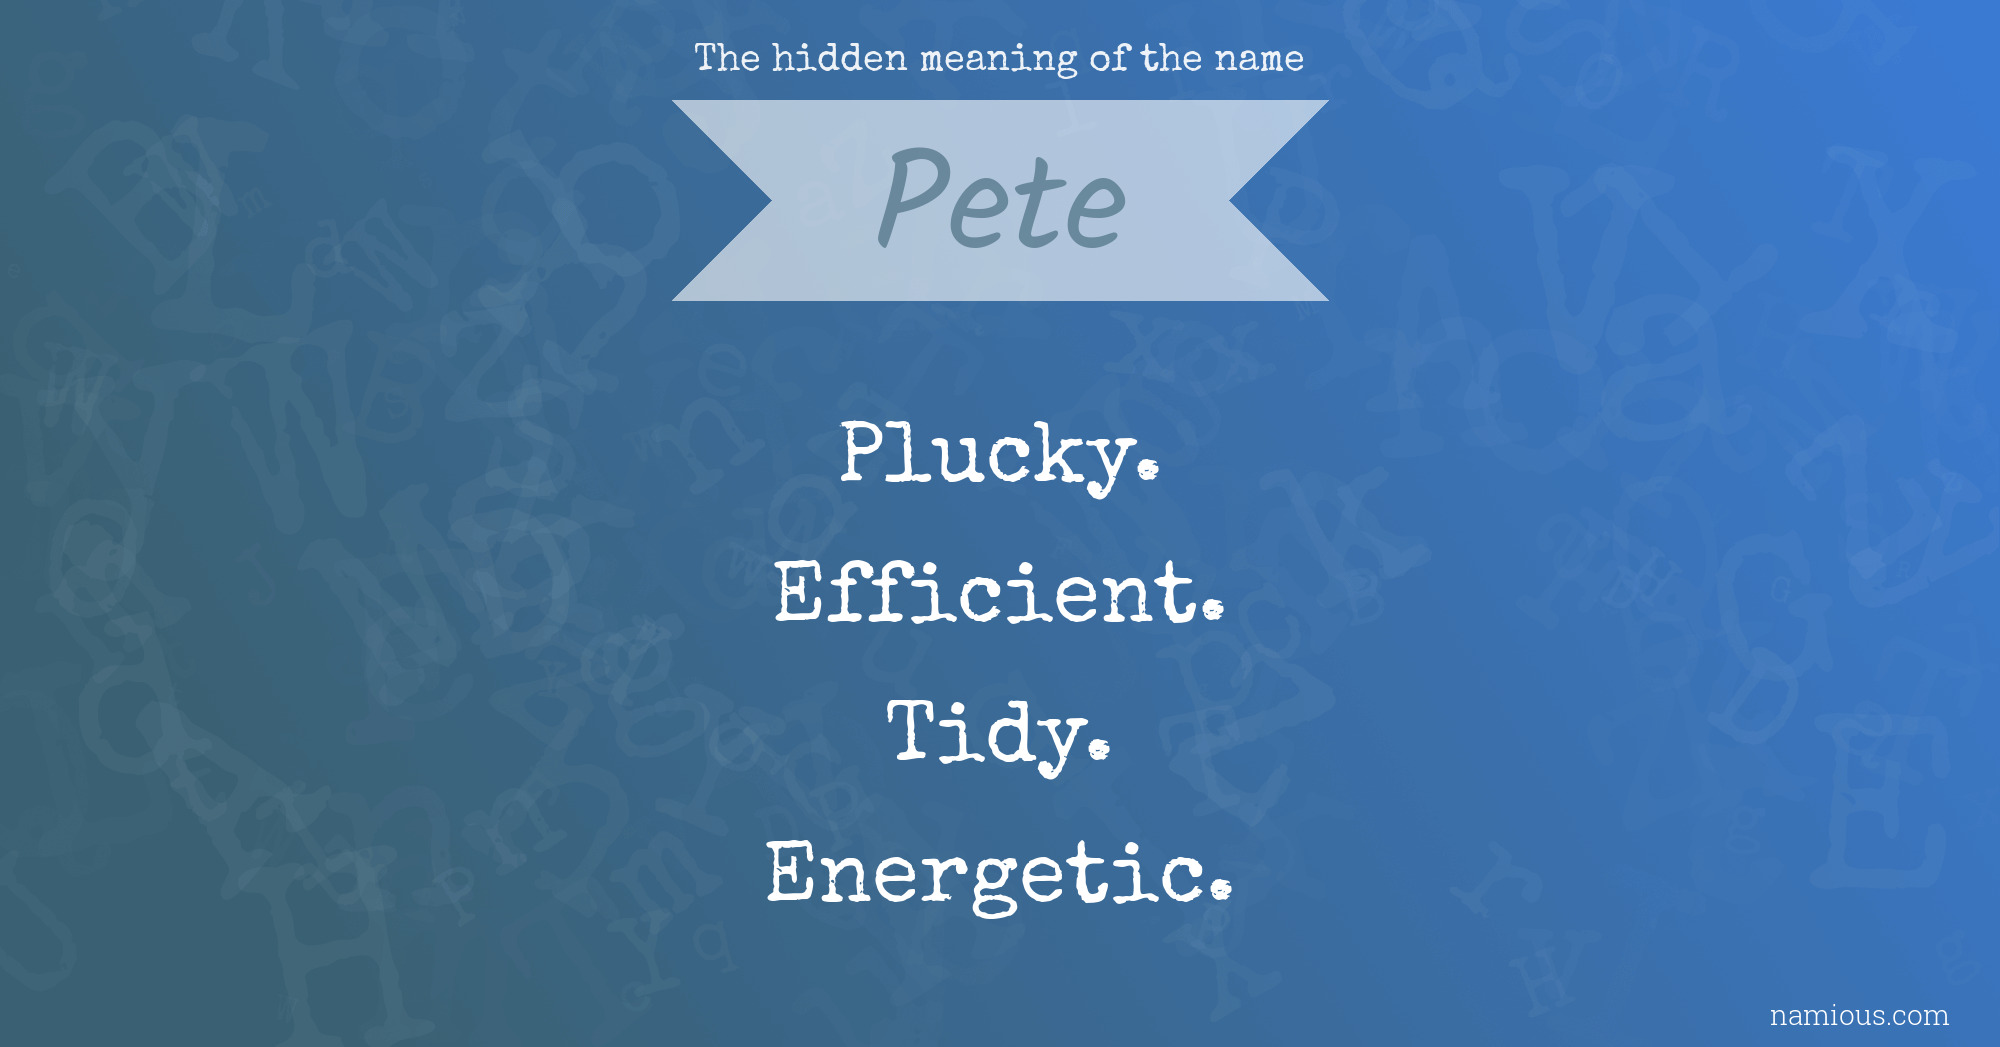 The hidden meaning of the name Pete